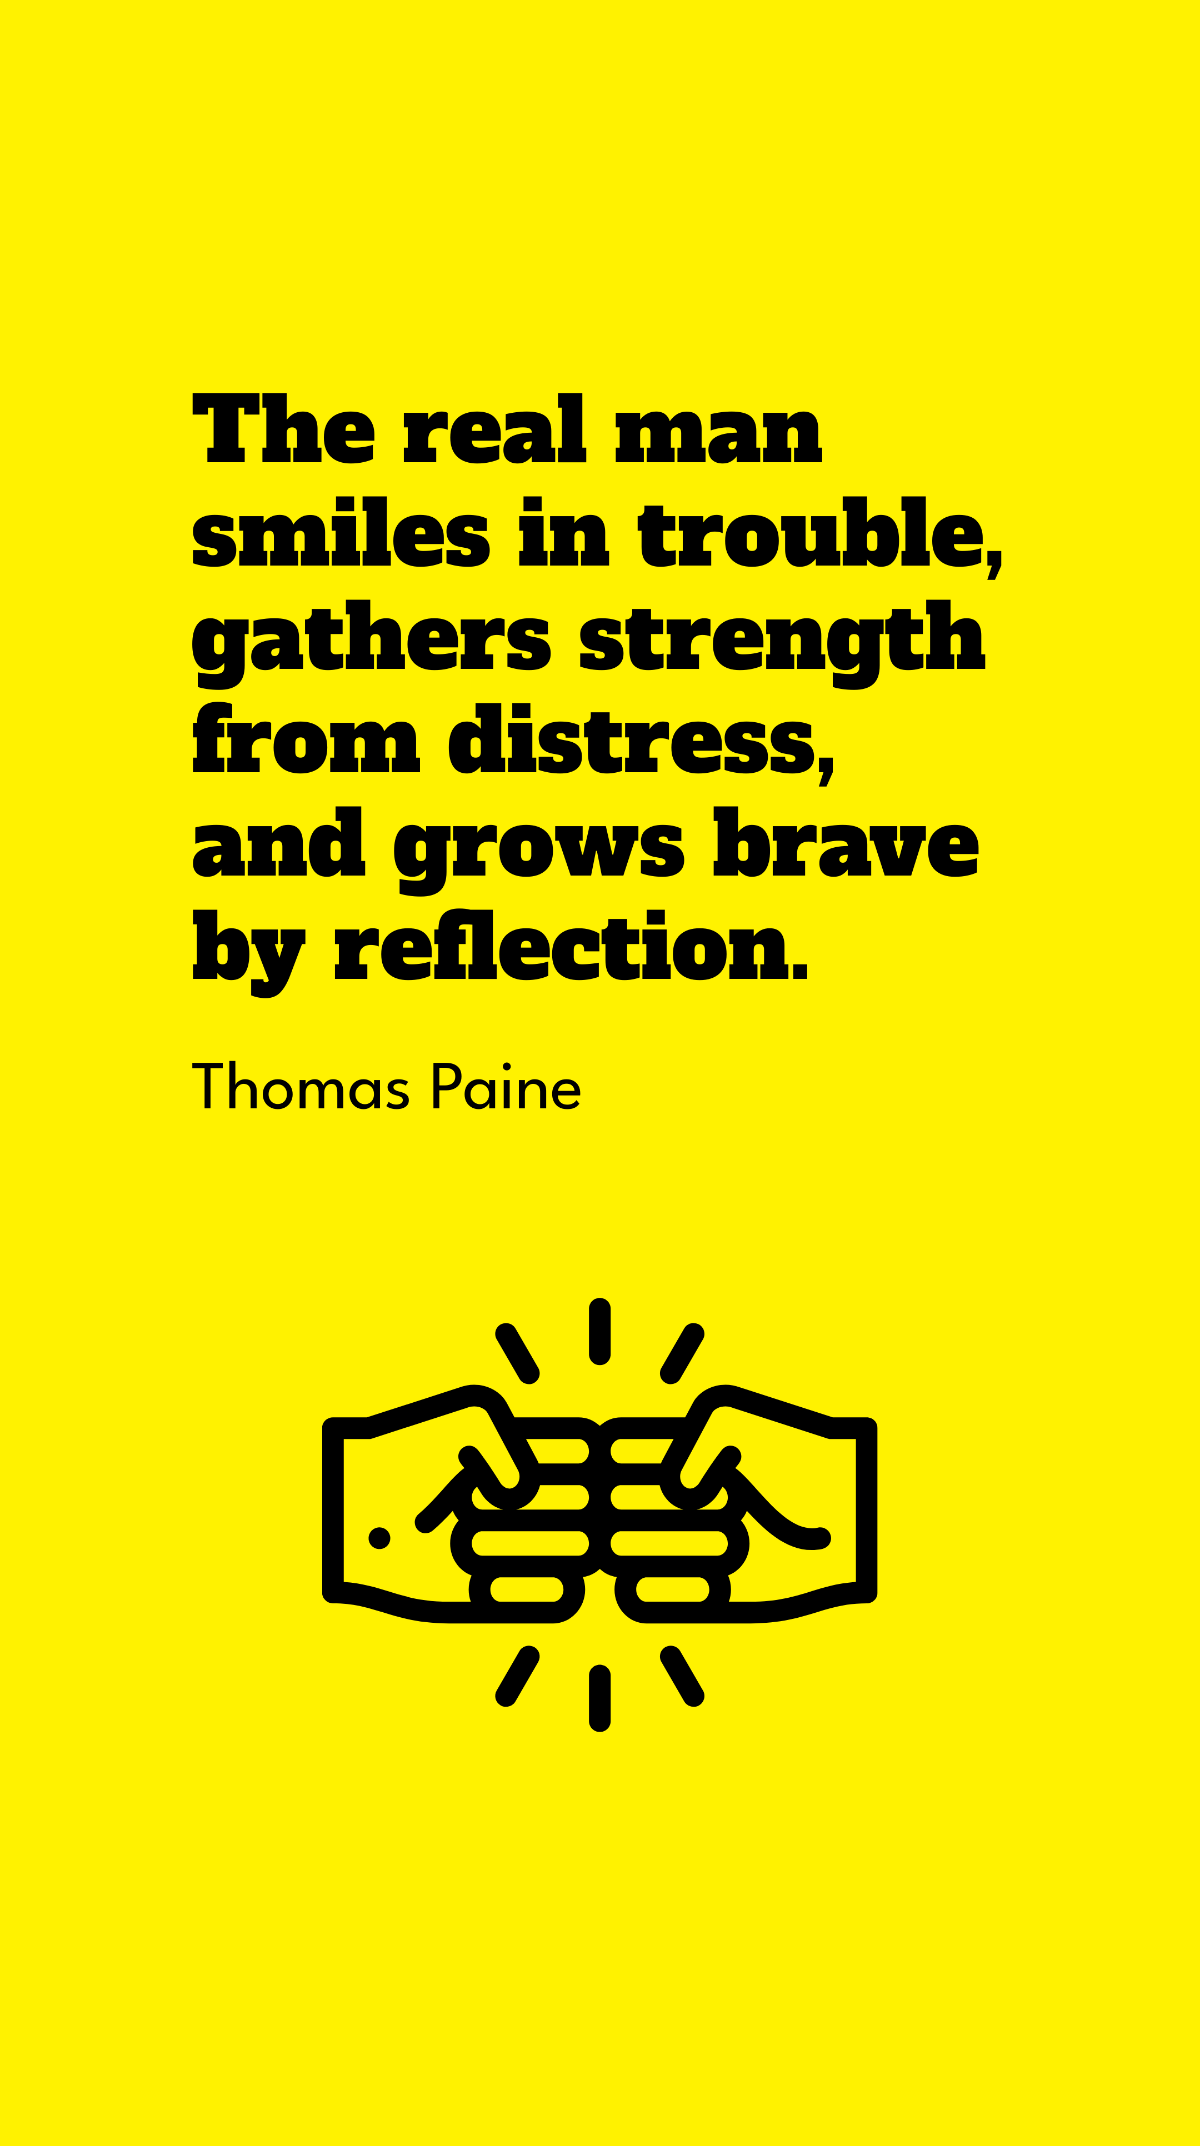 Thomas Paine - The real man smiles in trouble, gathers strength from distress, and grows brave by reflection. Template